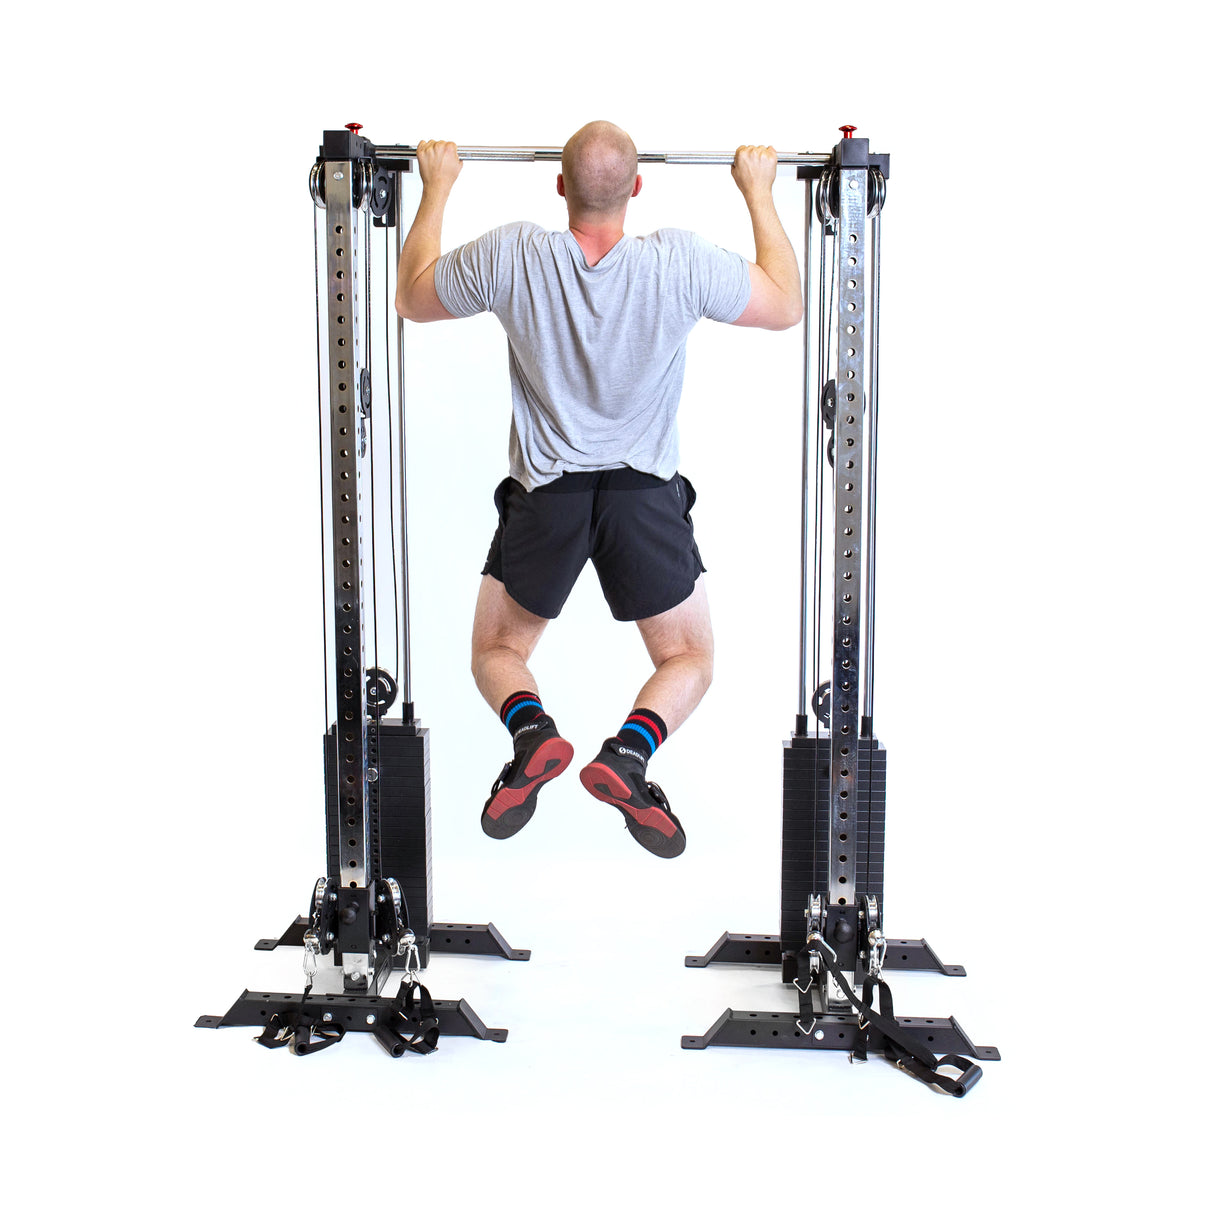 Male athlete doing pull-up using Adjustable Pull-up Bar Rack Attachment - 2.3" x 2."3 Knurled Stainless